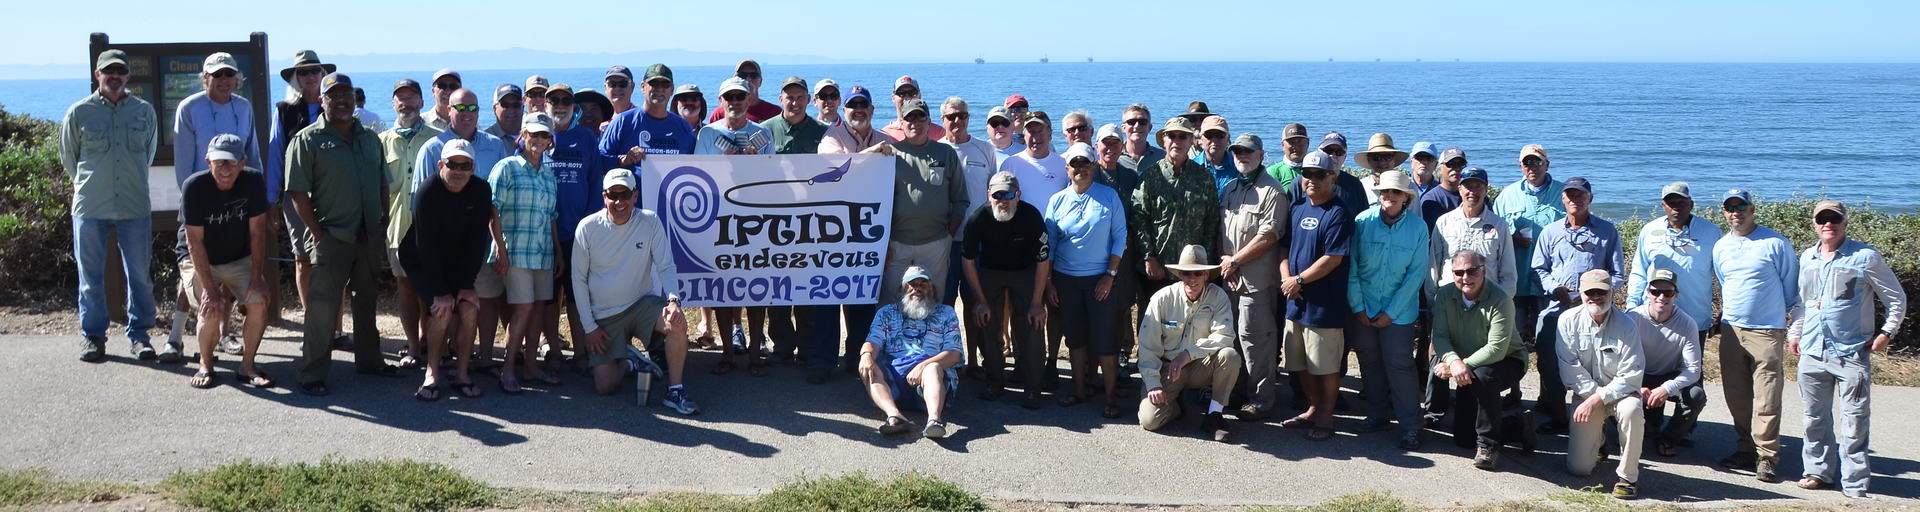 2017 Riptide Rendezvous group picture